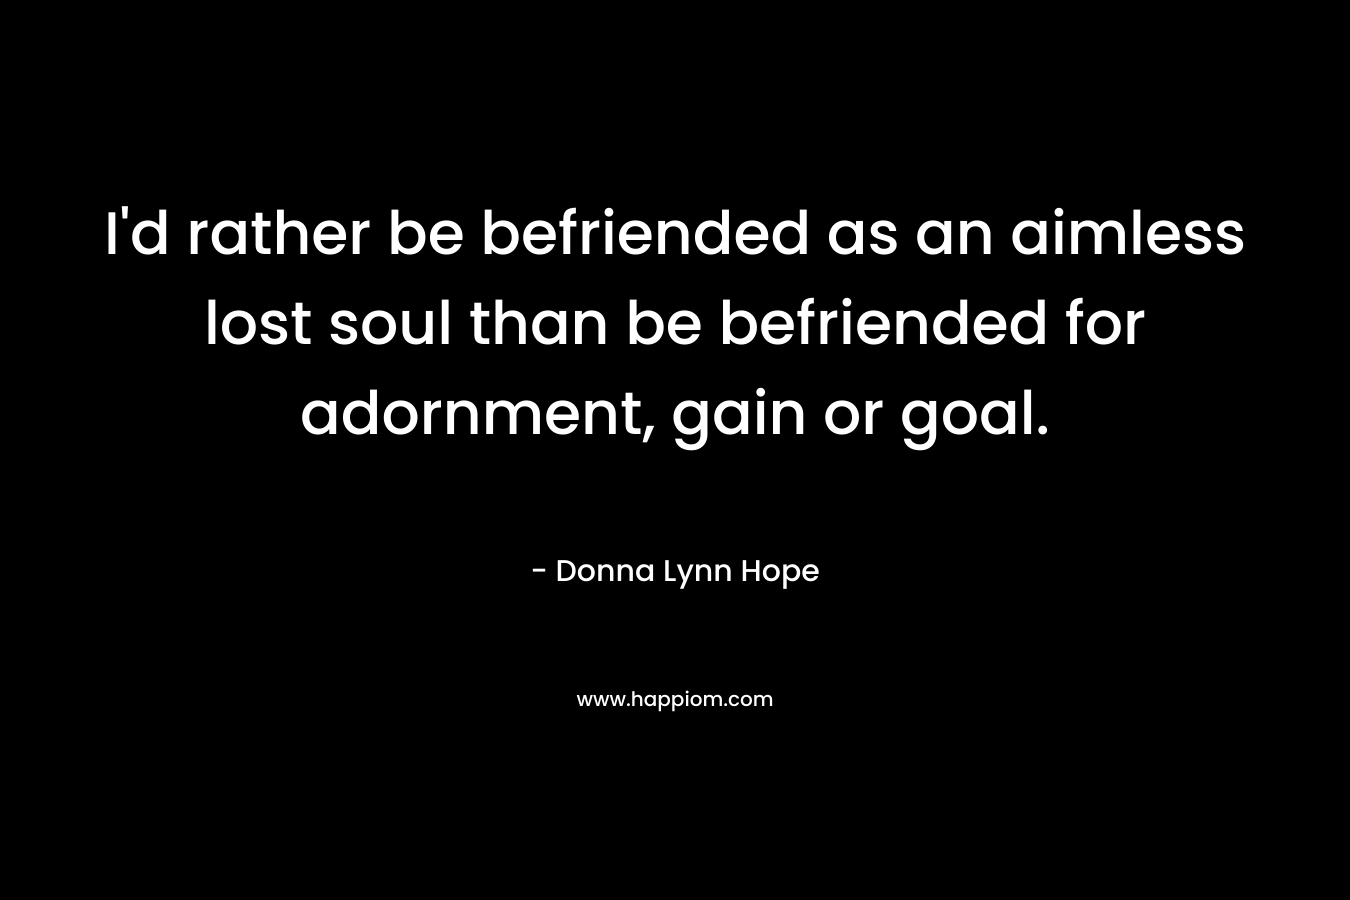 I'd rather be befriended as an aimless lost soul than be befriended for adornment, gain or goal.